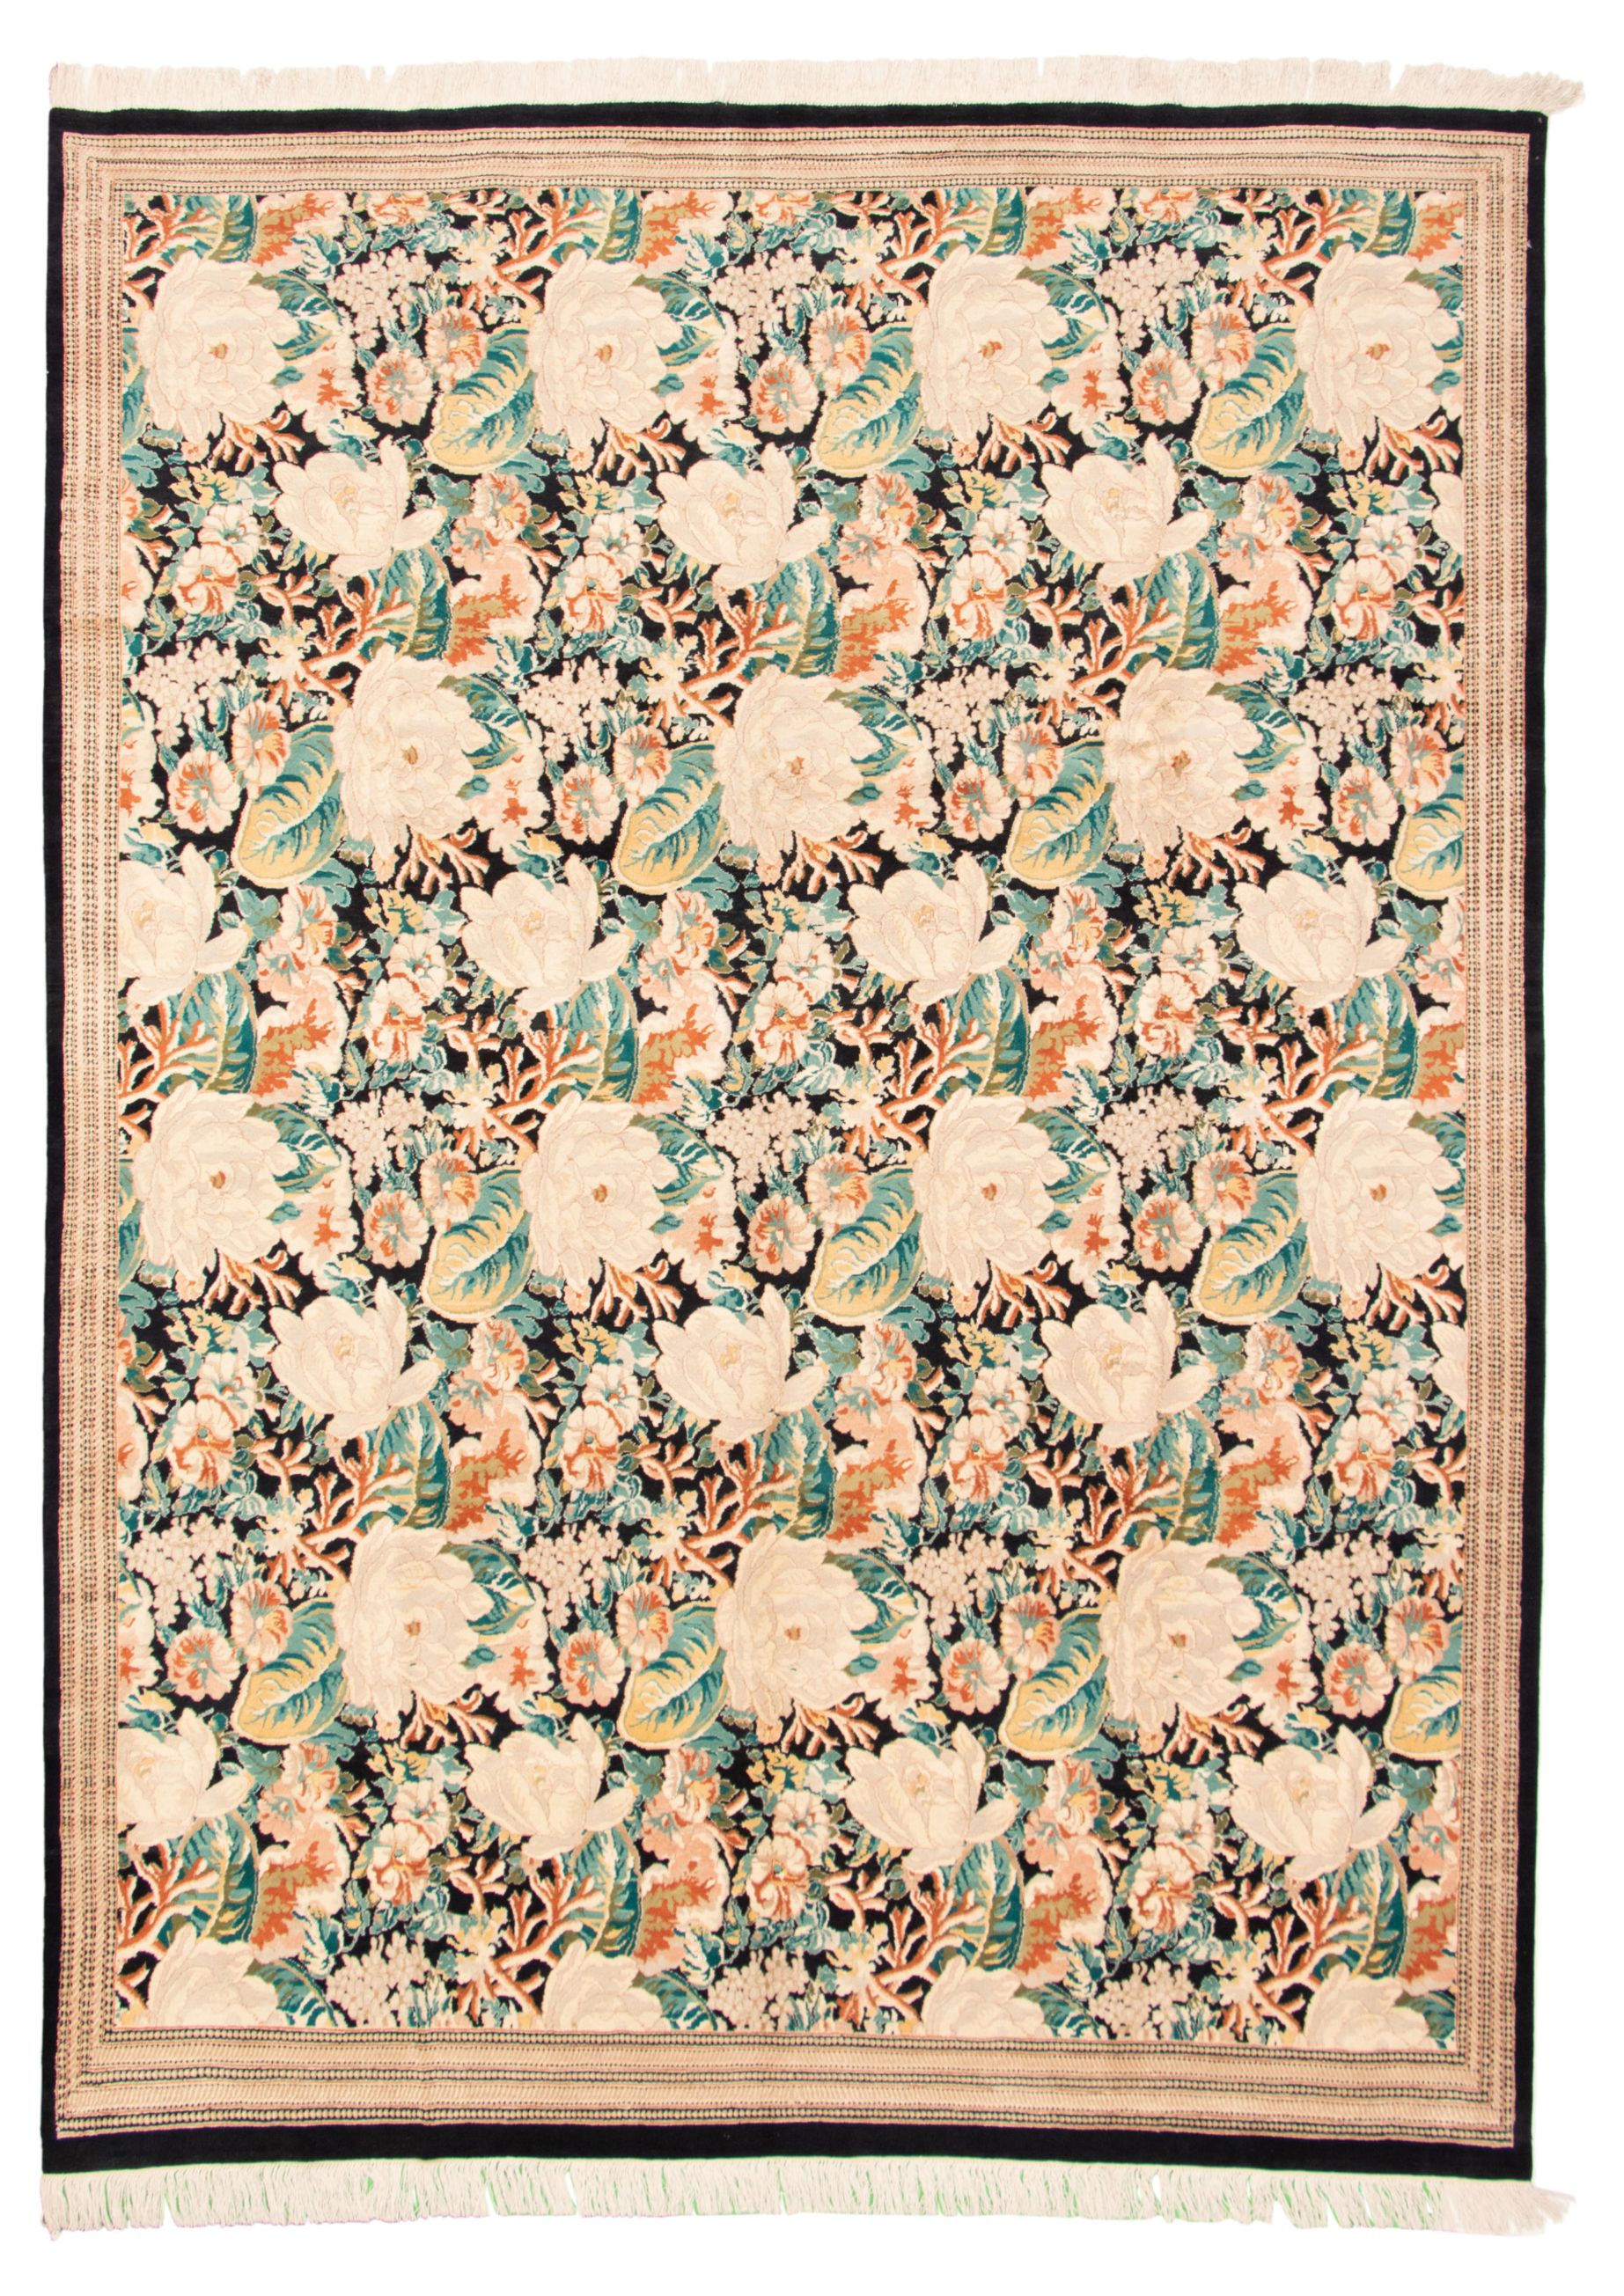 Hand-knotted Pako Persian 18/20 Black, Teal Wool Rug 9'1" x 12'4" Size: 9'1" x 12'4"  